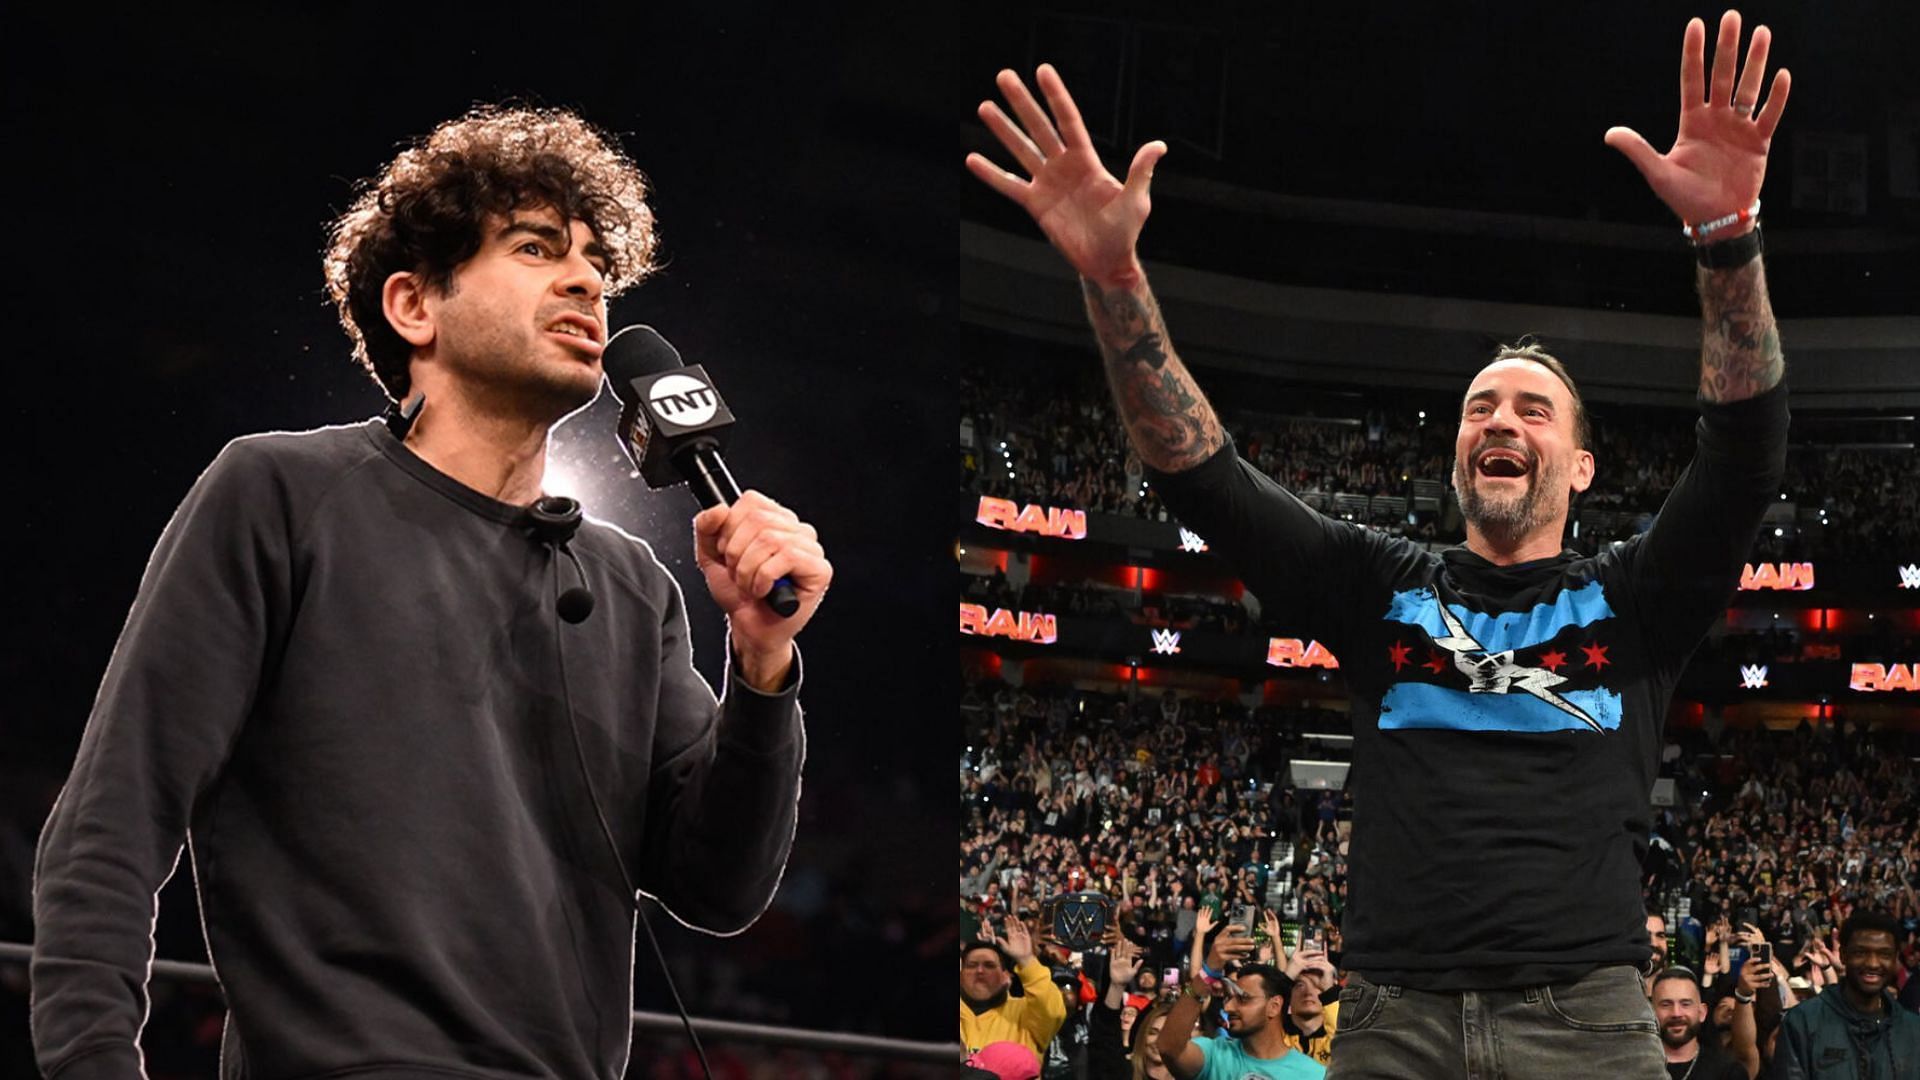 Tony Khan released CM Punk from AEW around seven months ago [Photo courtesy of AEW